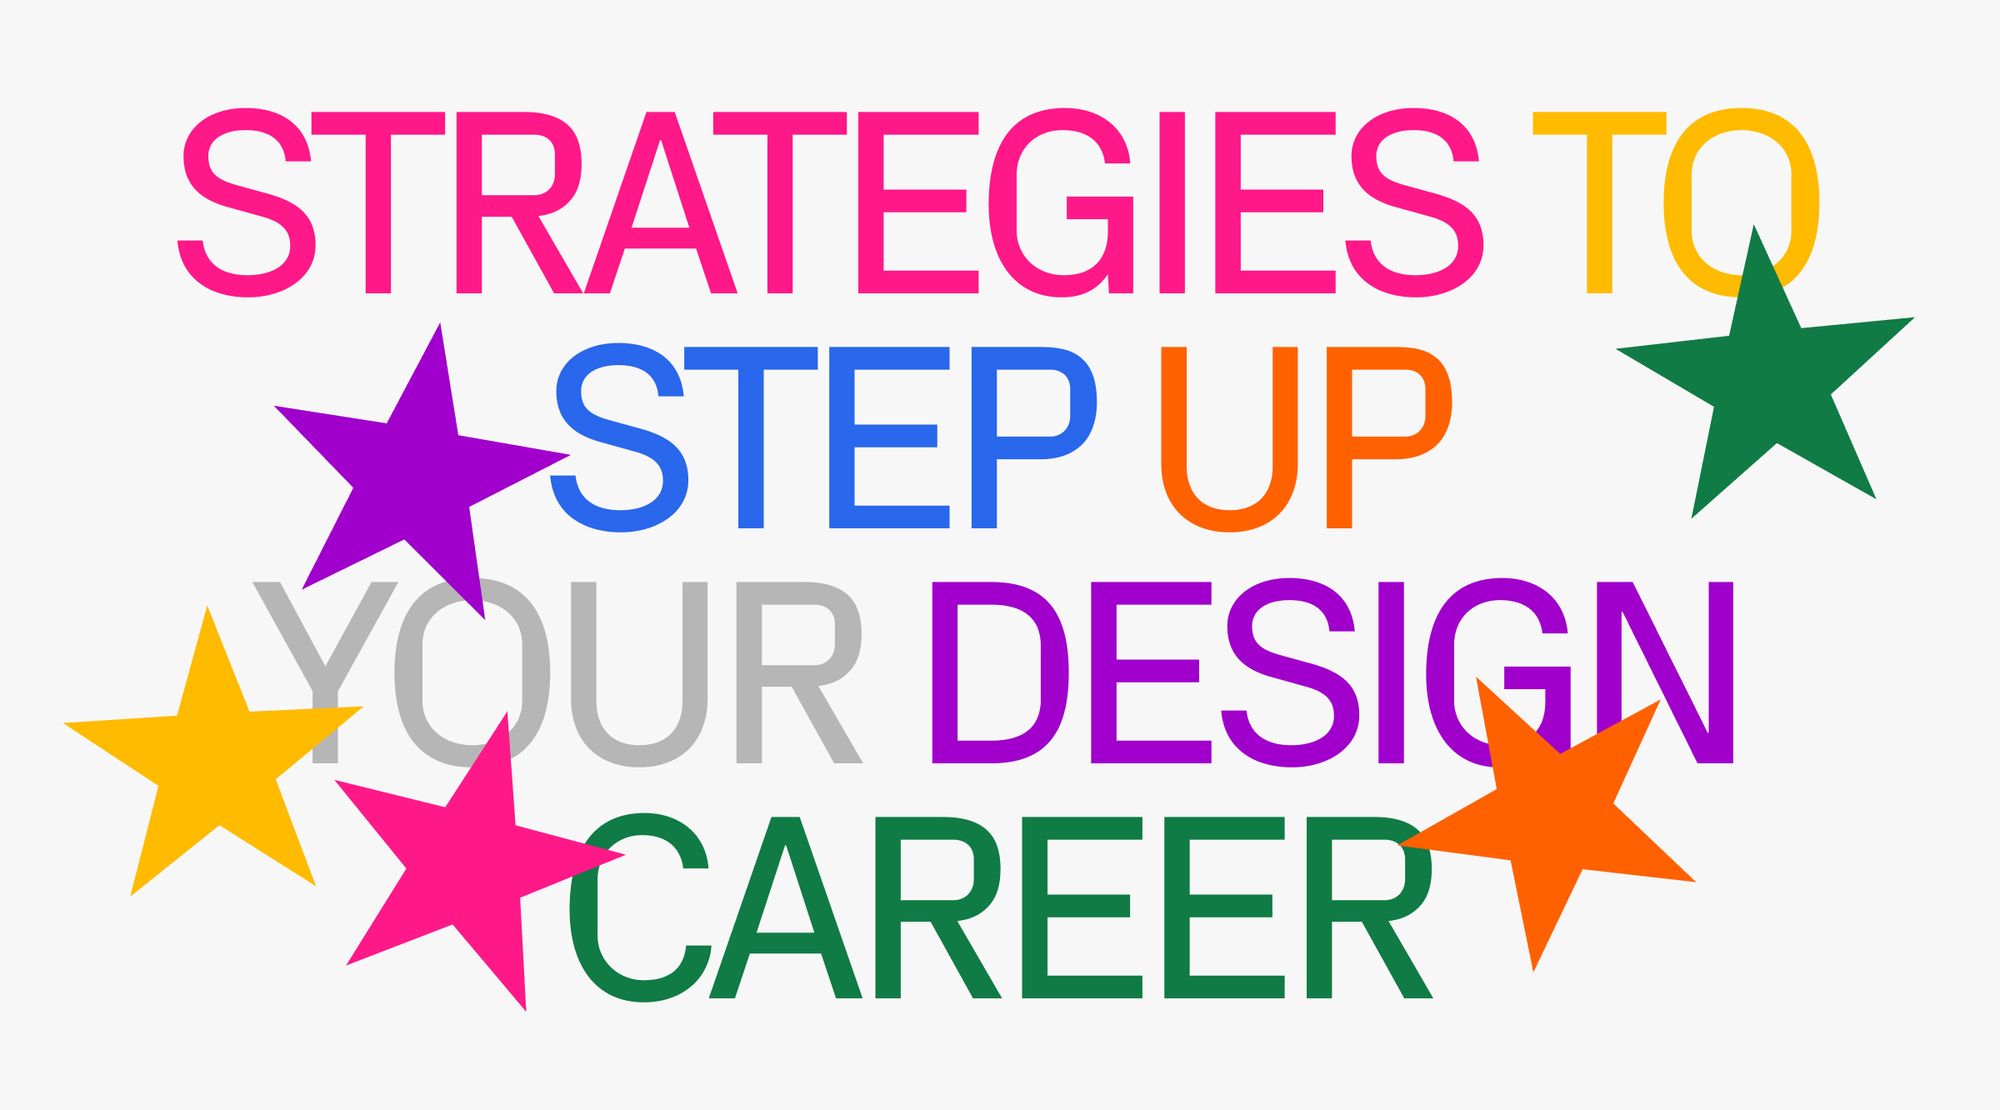 Readymag blog: strategies to step up your design career